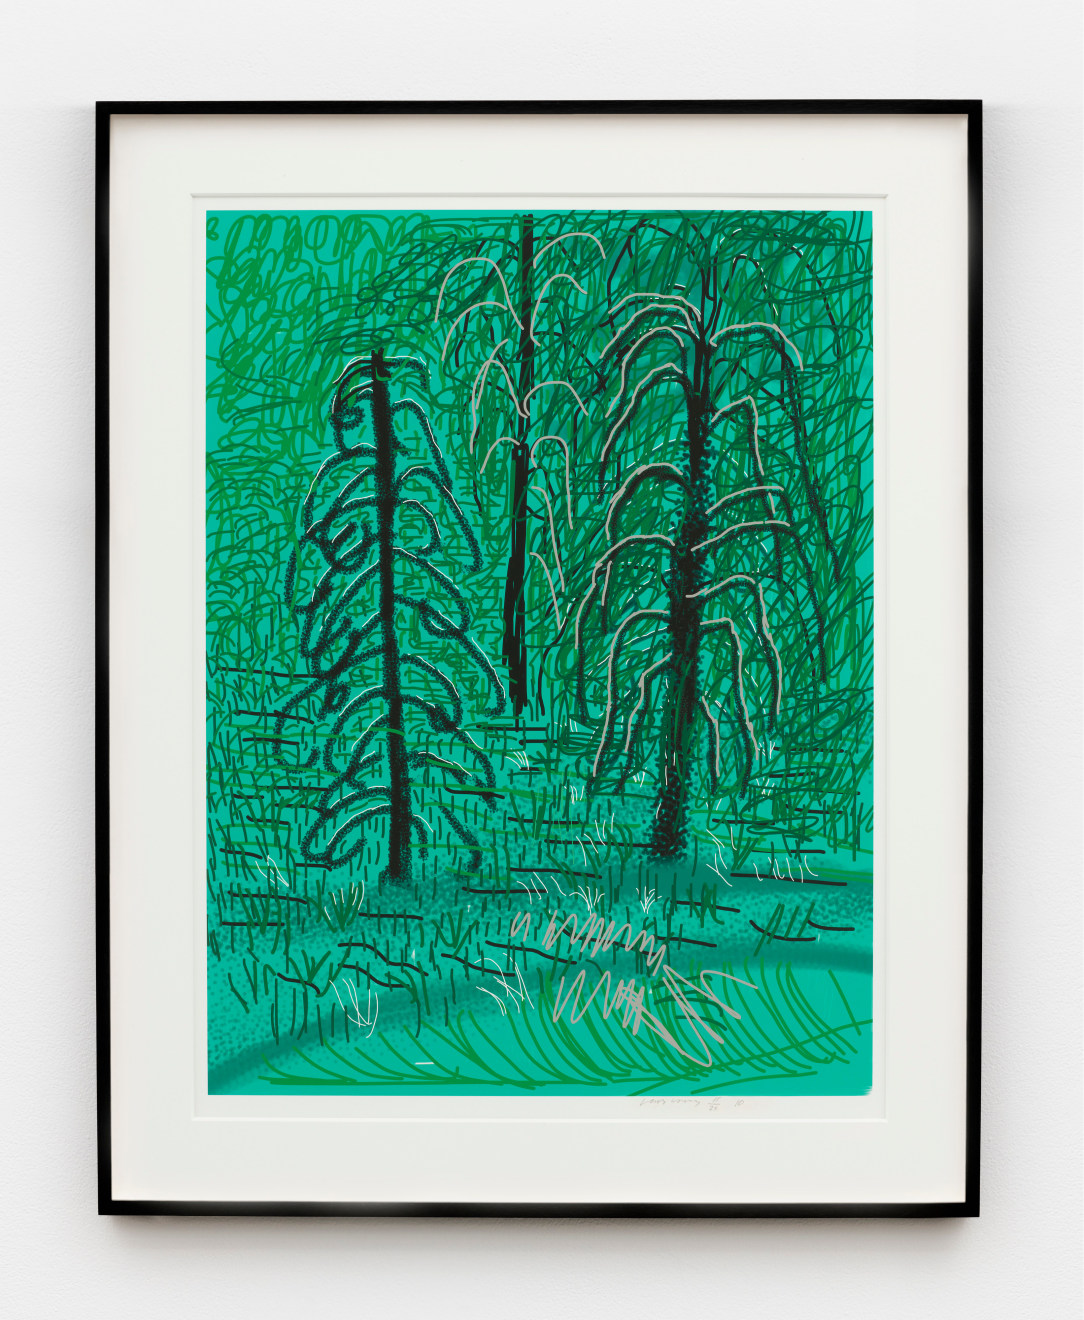 David Hockney, &quot;Untitled No.16&quot; from &quot;The Yosemite Suite&quot;, 2010